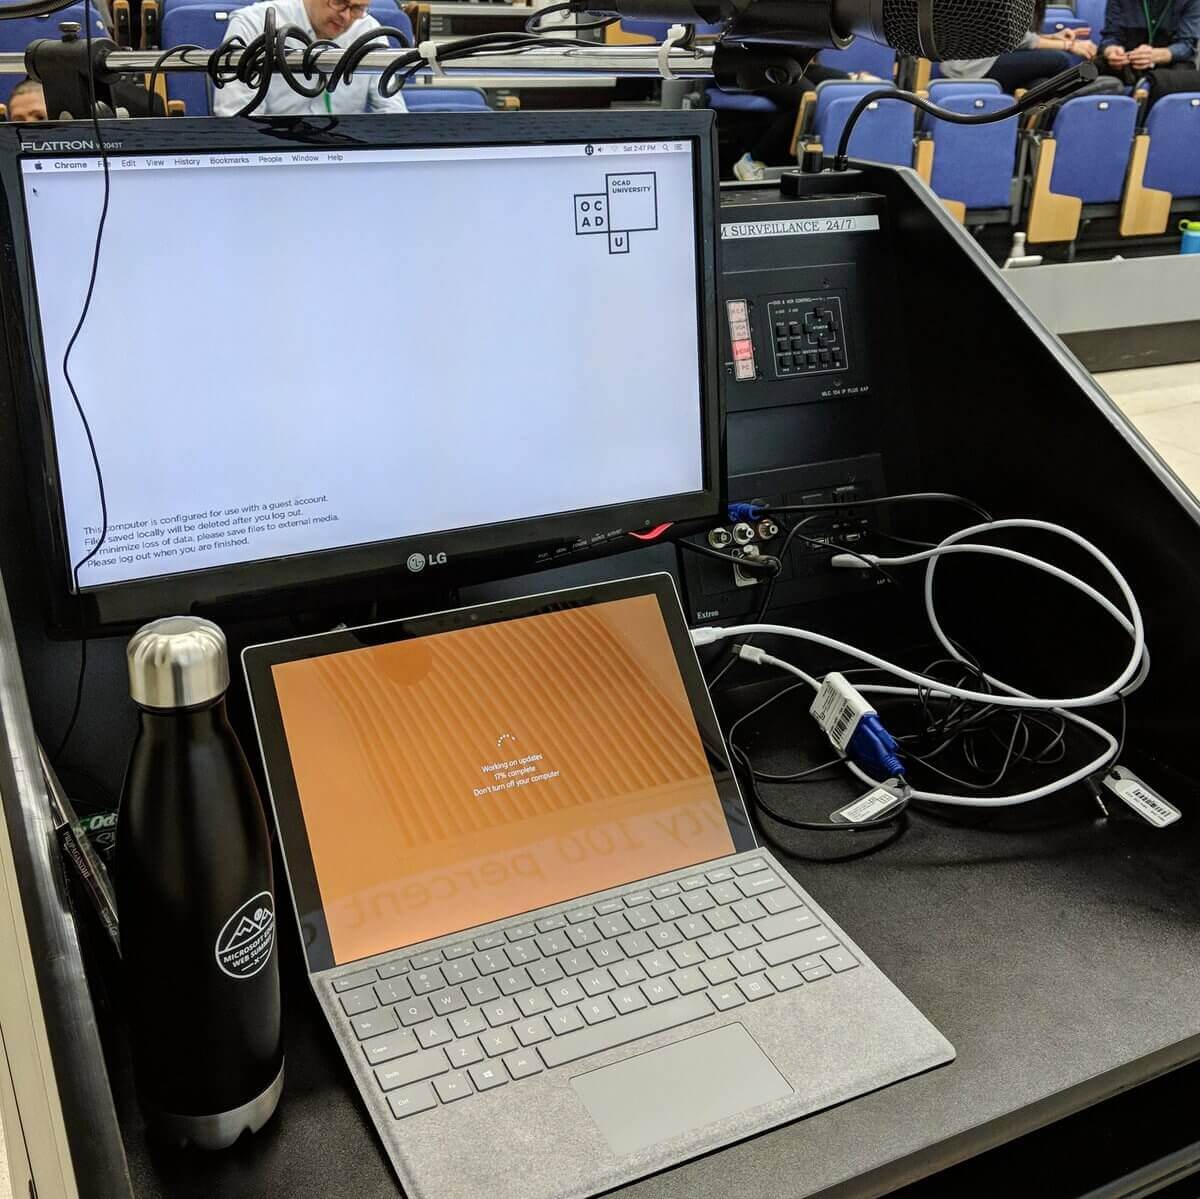 A laptop on a lectern with a gathering crowd in the seats in the background. The laptop screen says “Working on updates. 17% complete. Don’t turn off your computer.”